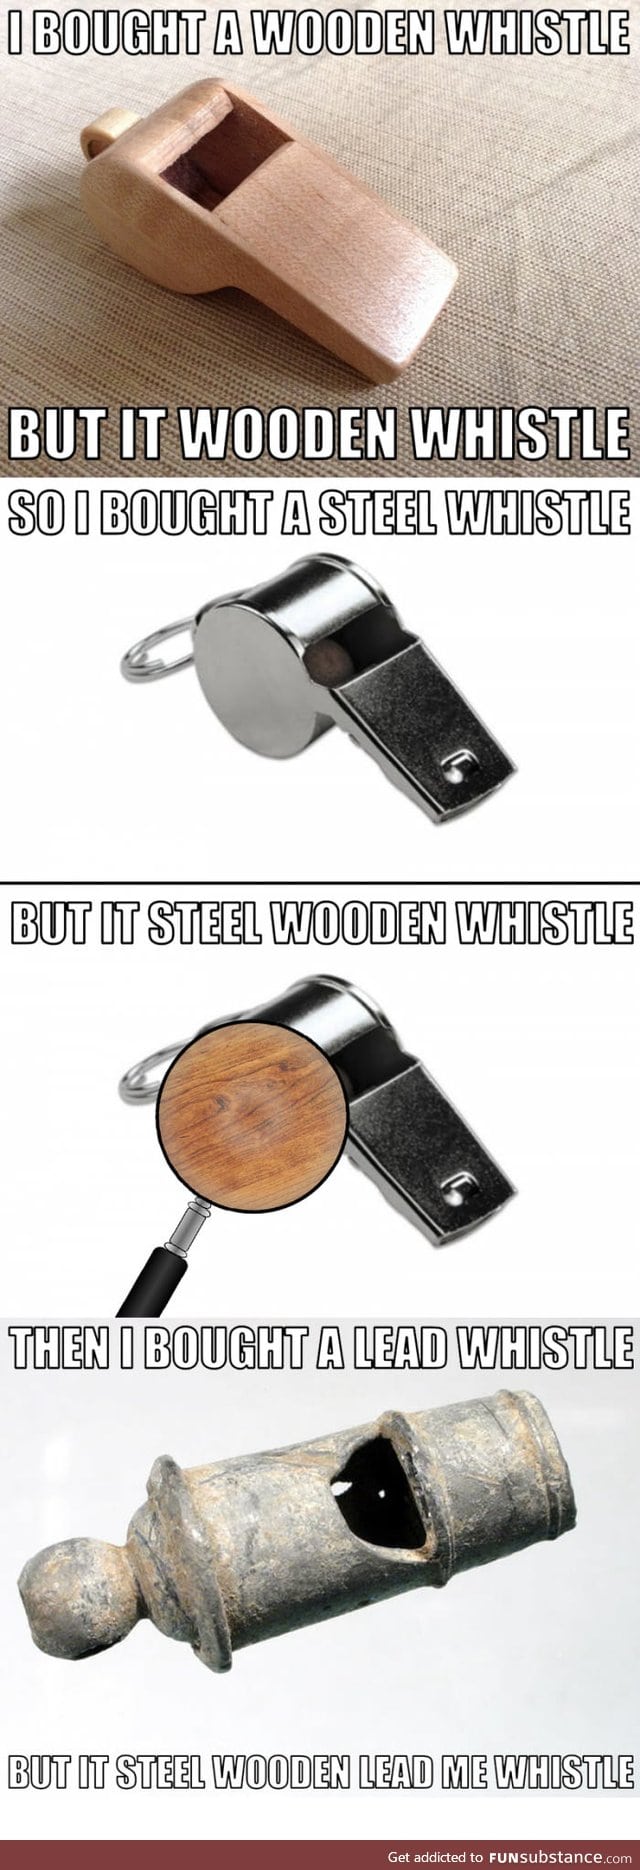 Wooden whistle 2.0